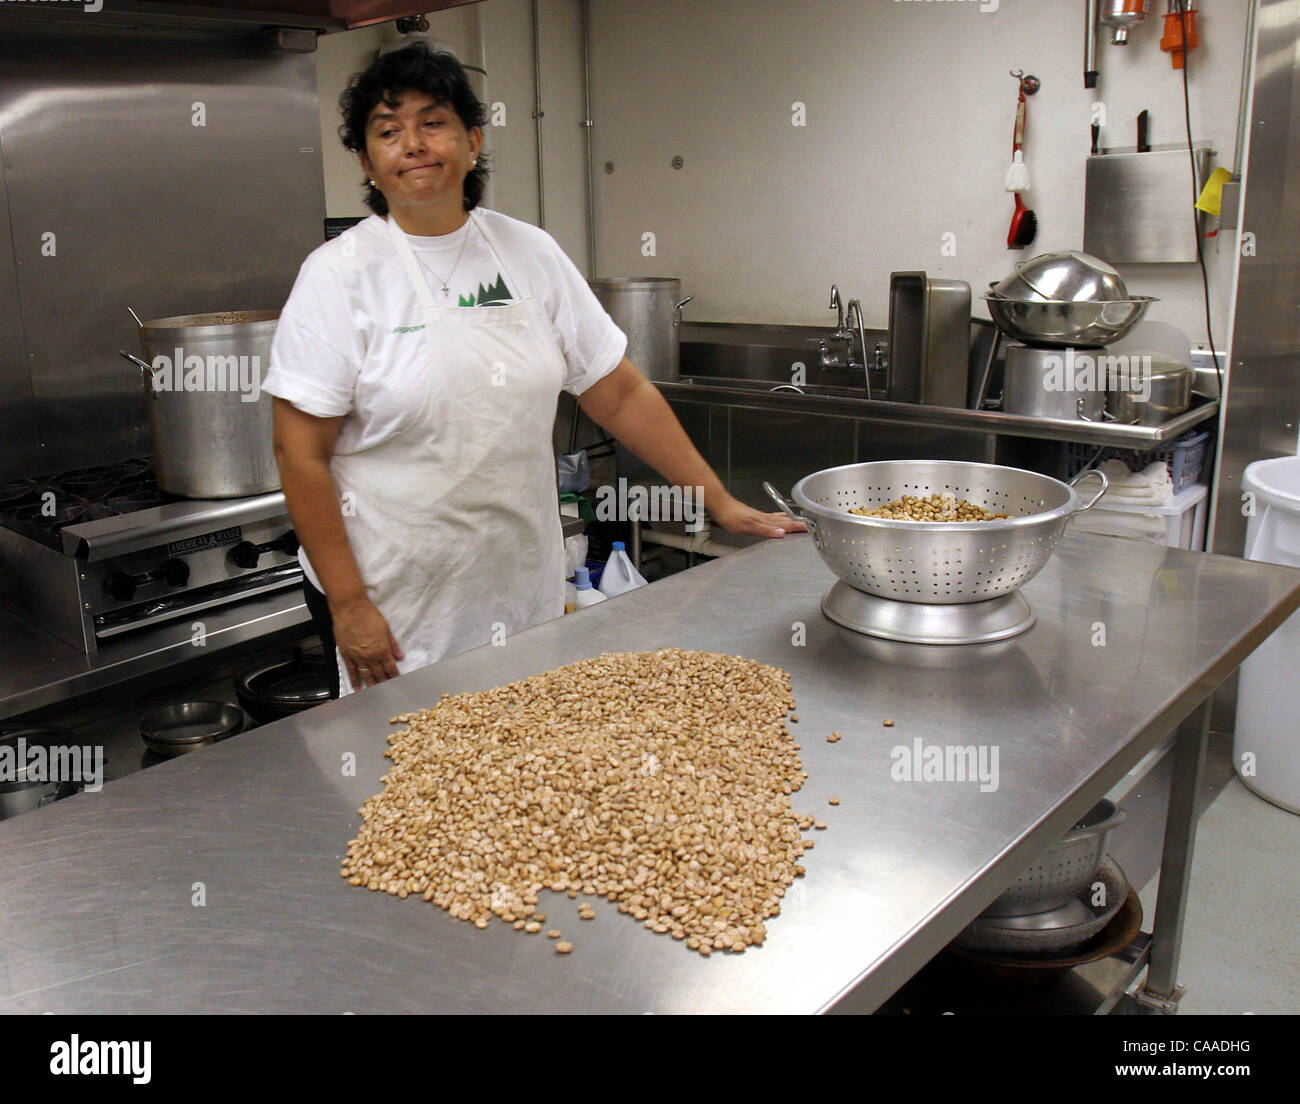 Whispering Winds Catholic Conference Center cook Roasaura Soto has cooked for days food to accomodate 1000 catholics expected at the center Sunday.   Her she tends to beans yet to be cooked.  UT/John Gastaldo Stock Photo